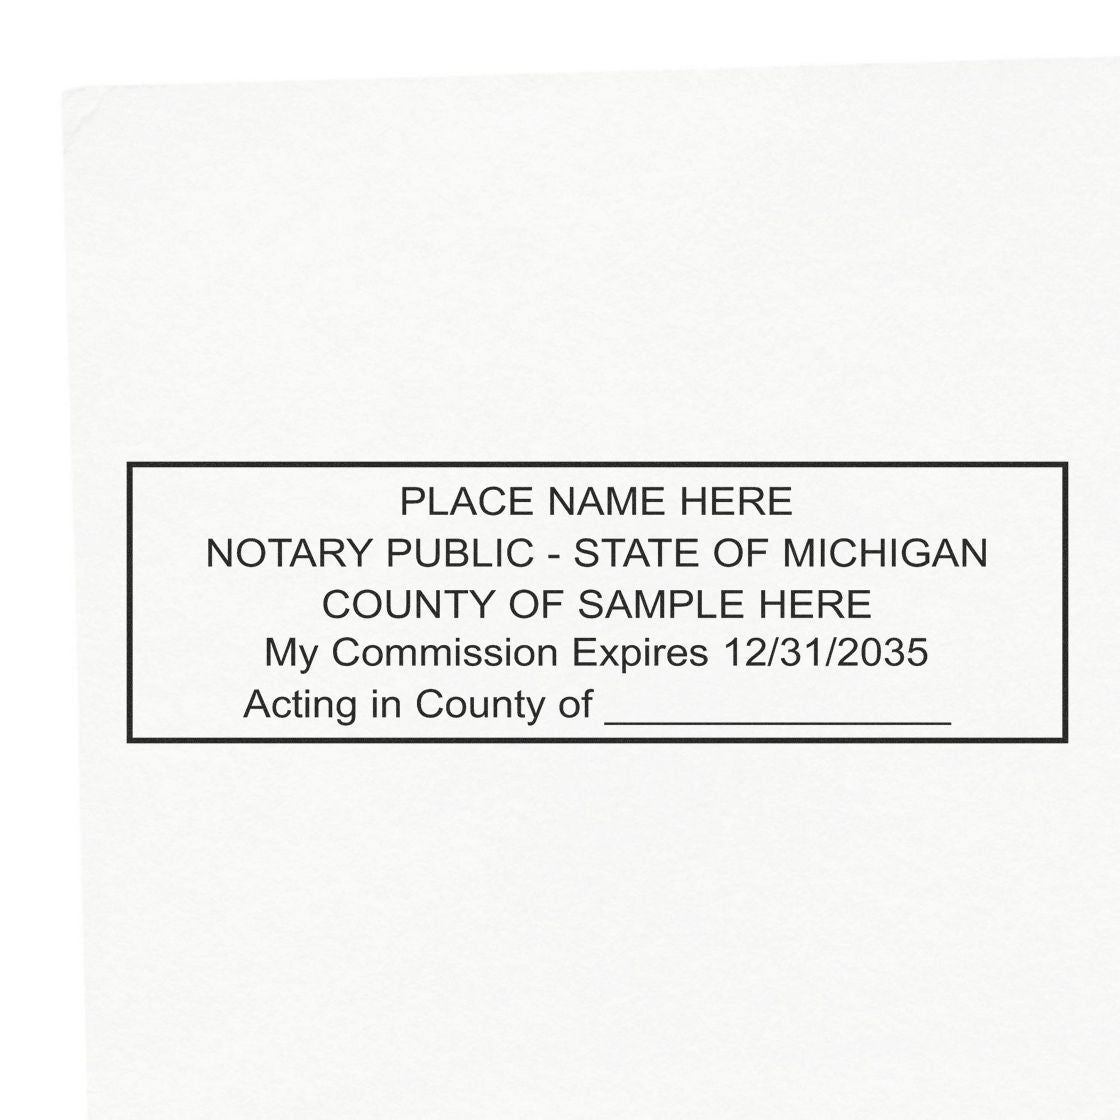 Another Example of a stamped impression of the Self-Inking State Seal Michigan Notary Stamp on a piece of office paper.